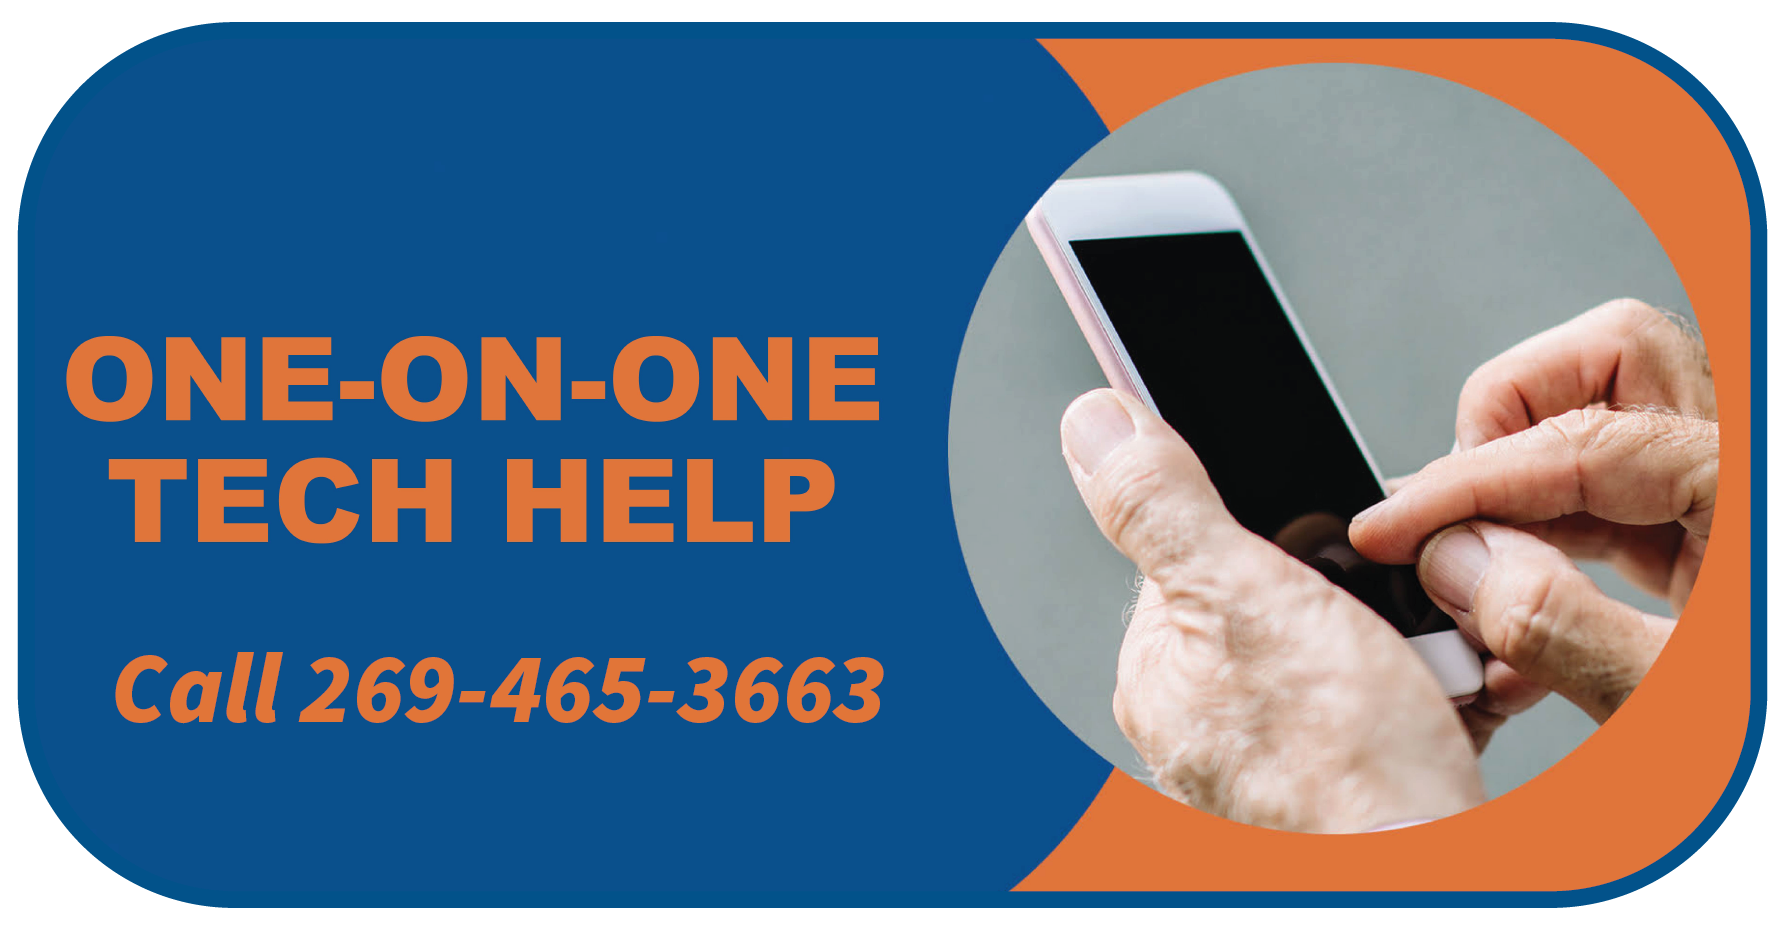 Register for Tech Help by calling 269-465-3663